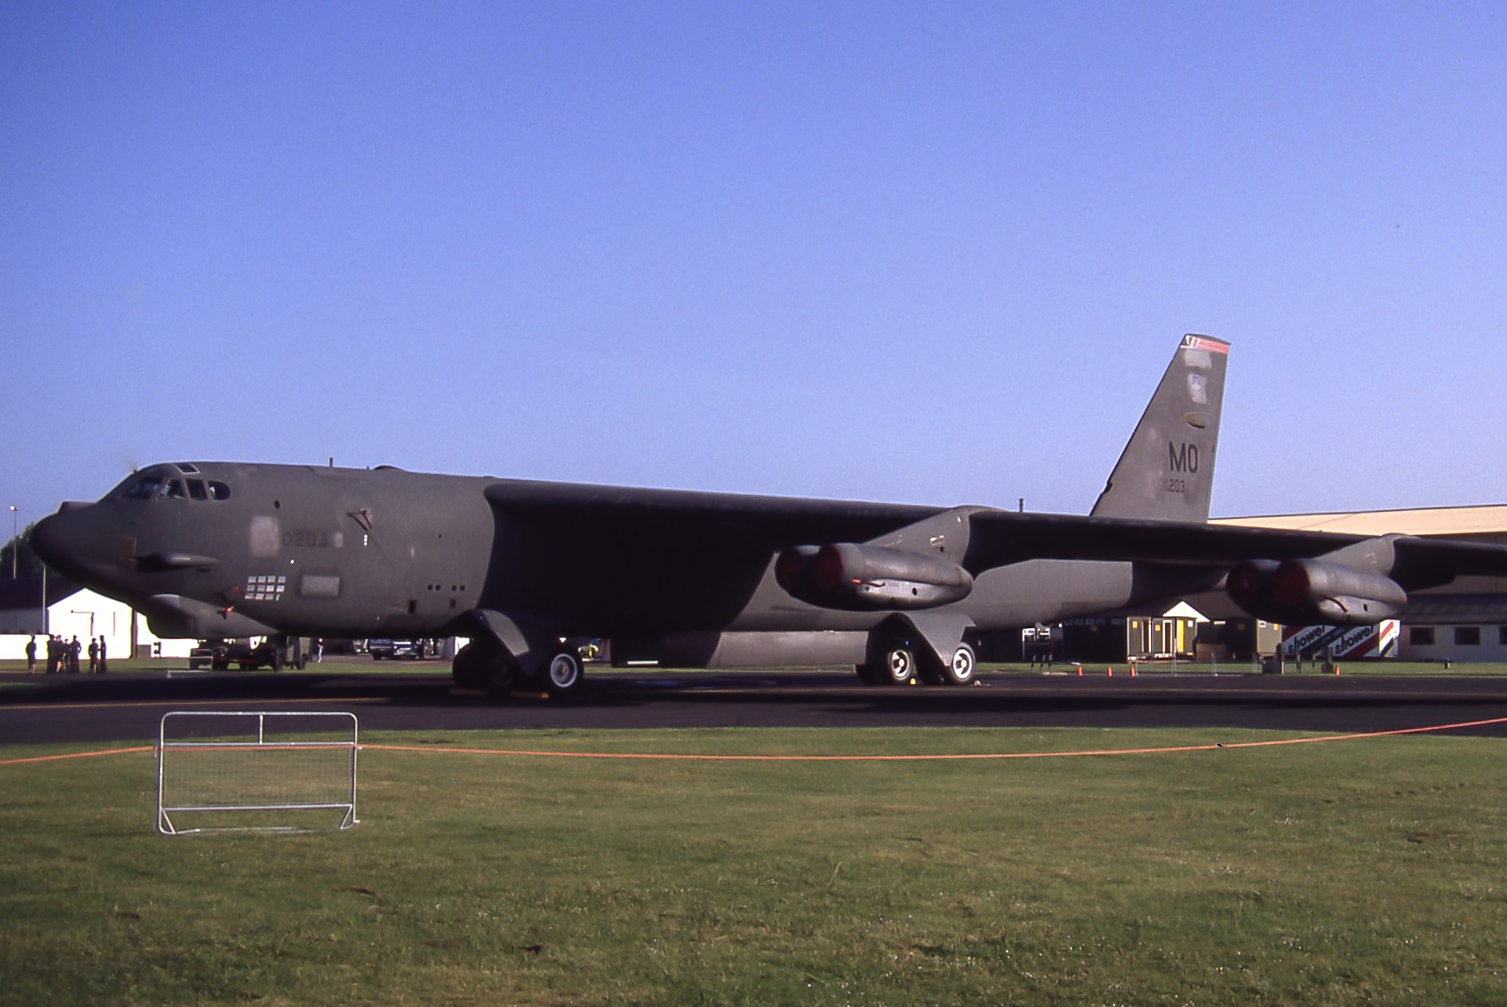 58-0203/580203 USAF - United States Air Force Boeing B-52 Stratofortress Airframe Information - AVSpotters.com